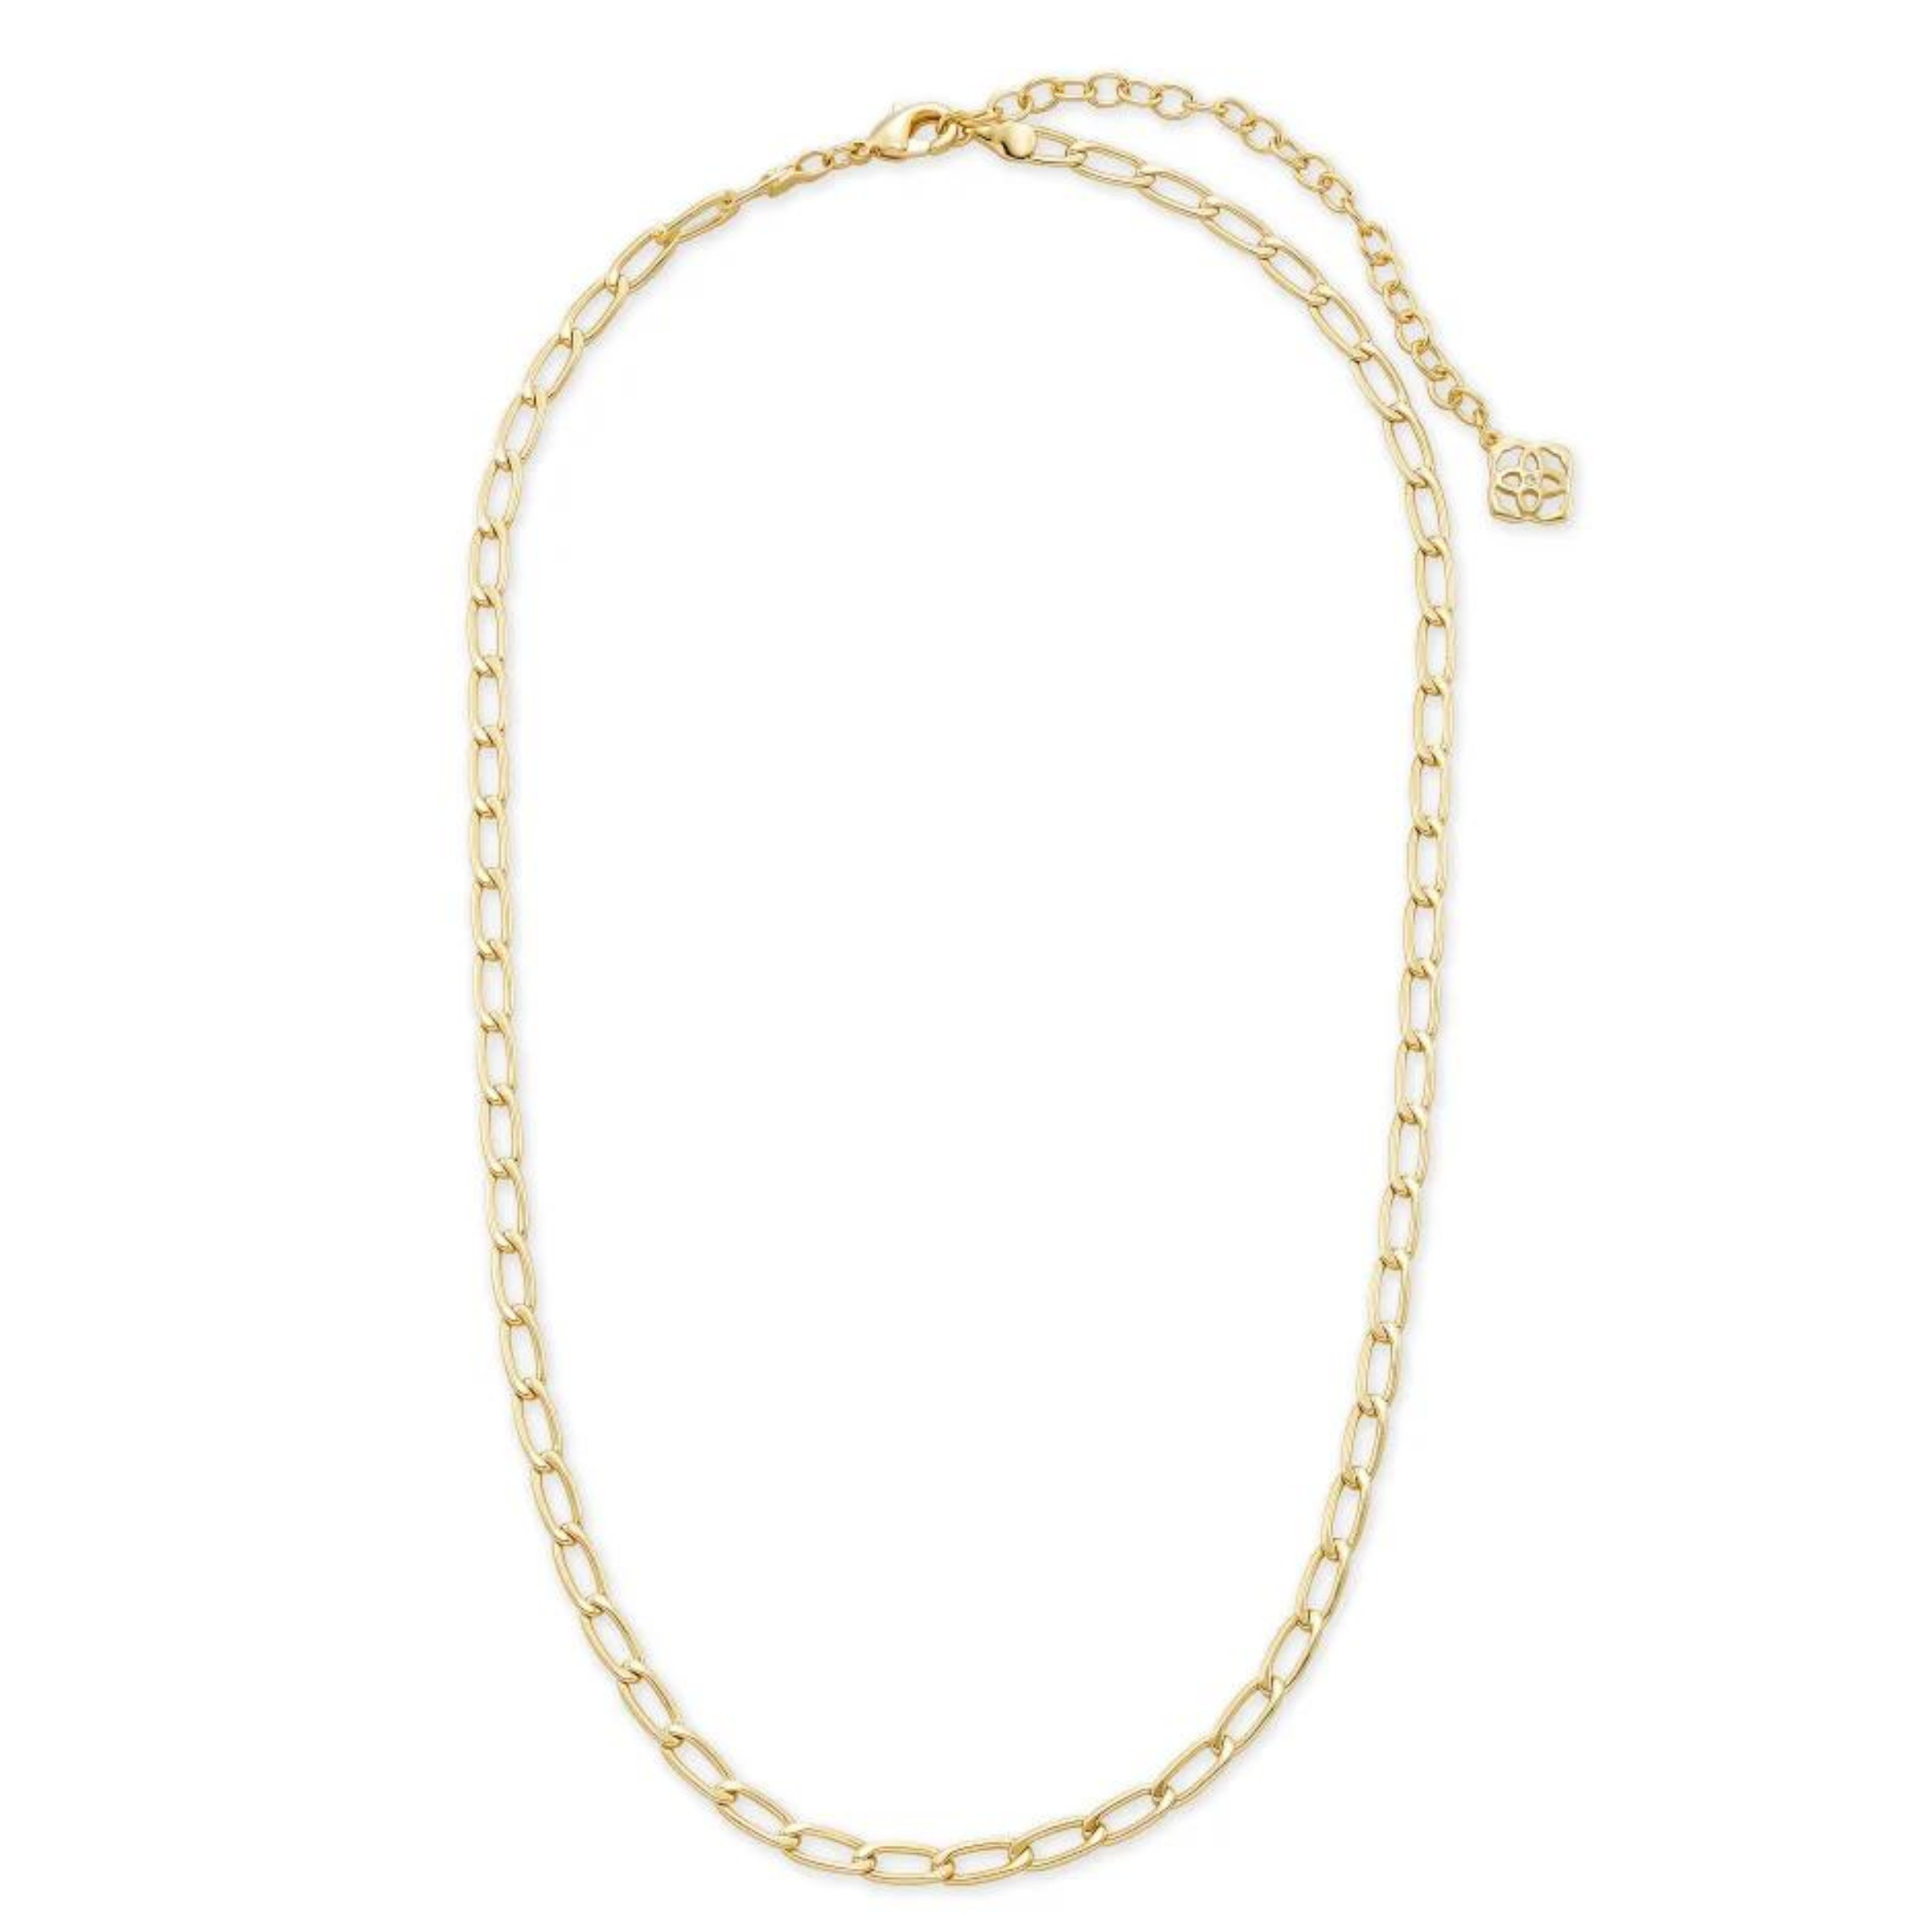 Kendra Scott | Merrick Chain Necklace in Gold - Giddy Up Glamour Boutique